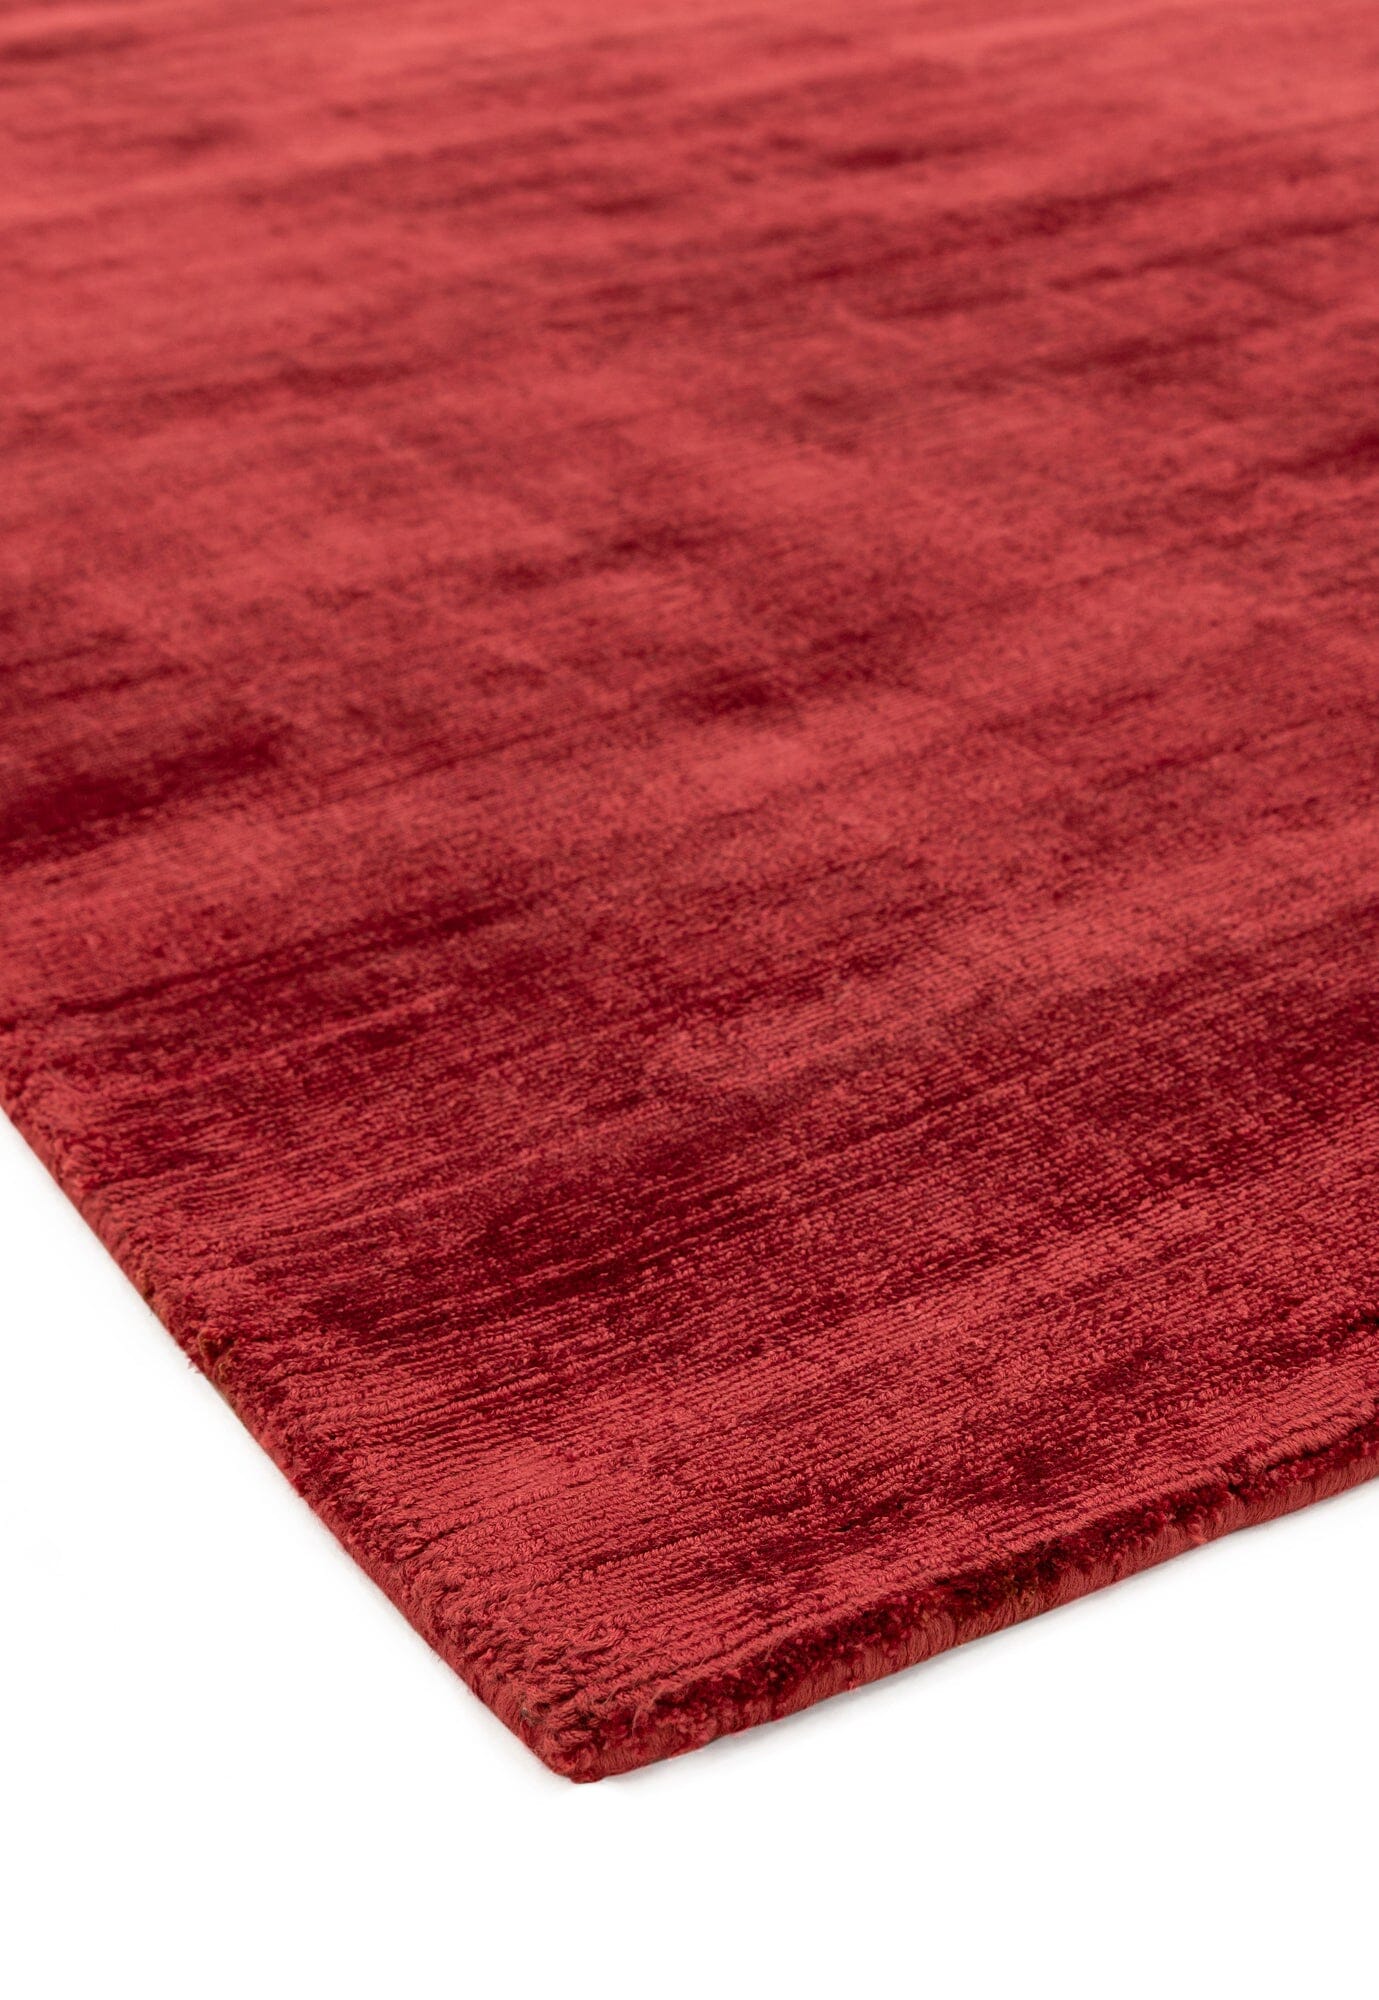  Asiatic Carpets-Asiatic Carpets Blade Hand Woven Runner Berry - 66 x 240cm-Red 045 